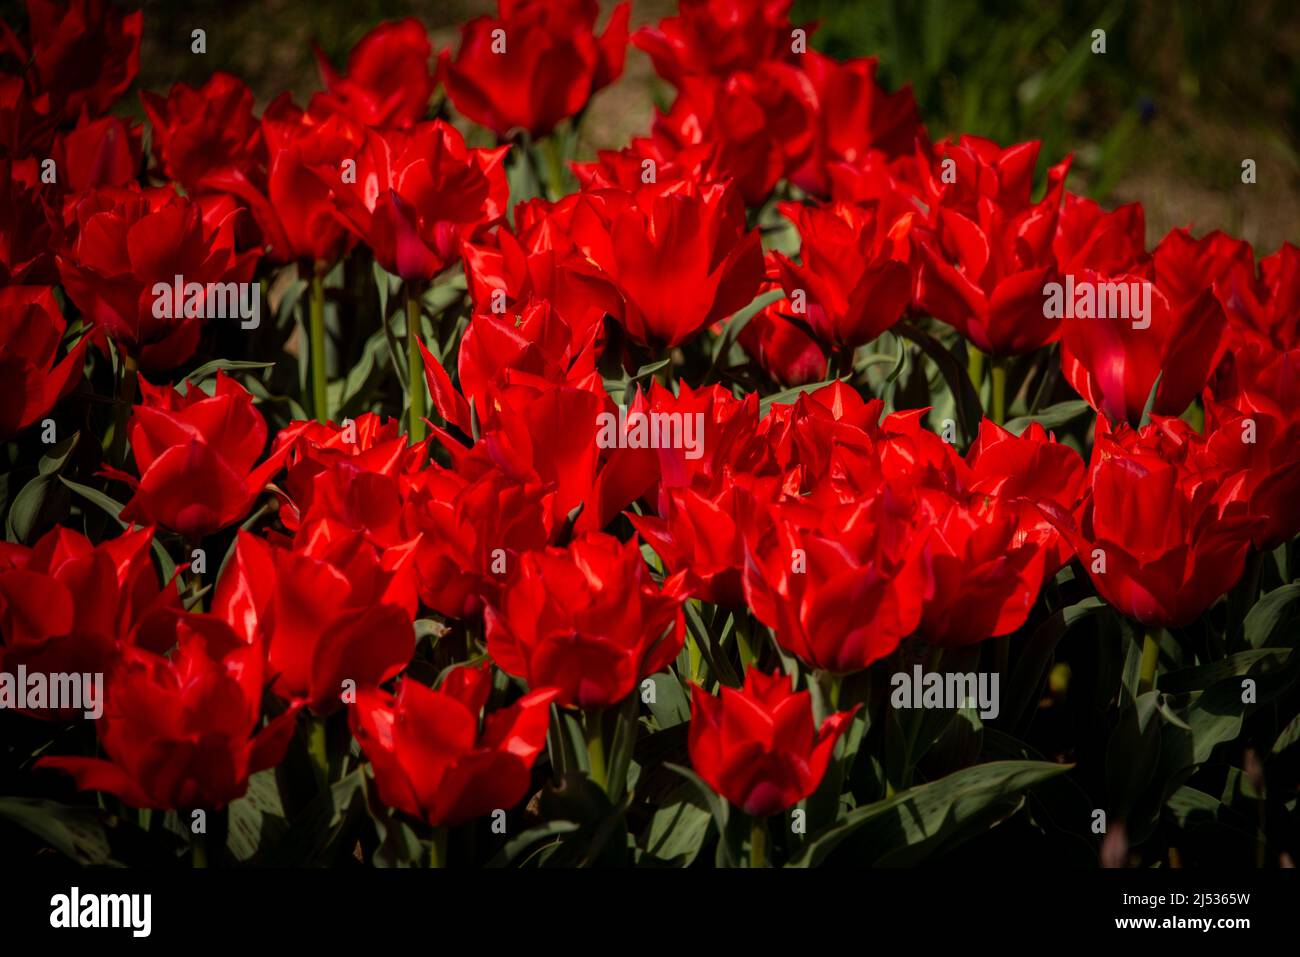 Tulpenfeuer: Ein Beet voller blutroter Tulpen - tulip fire: a flower bed full of blood-red tulips. Stock Photo